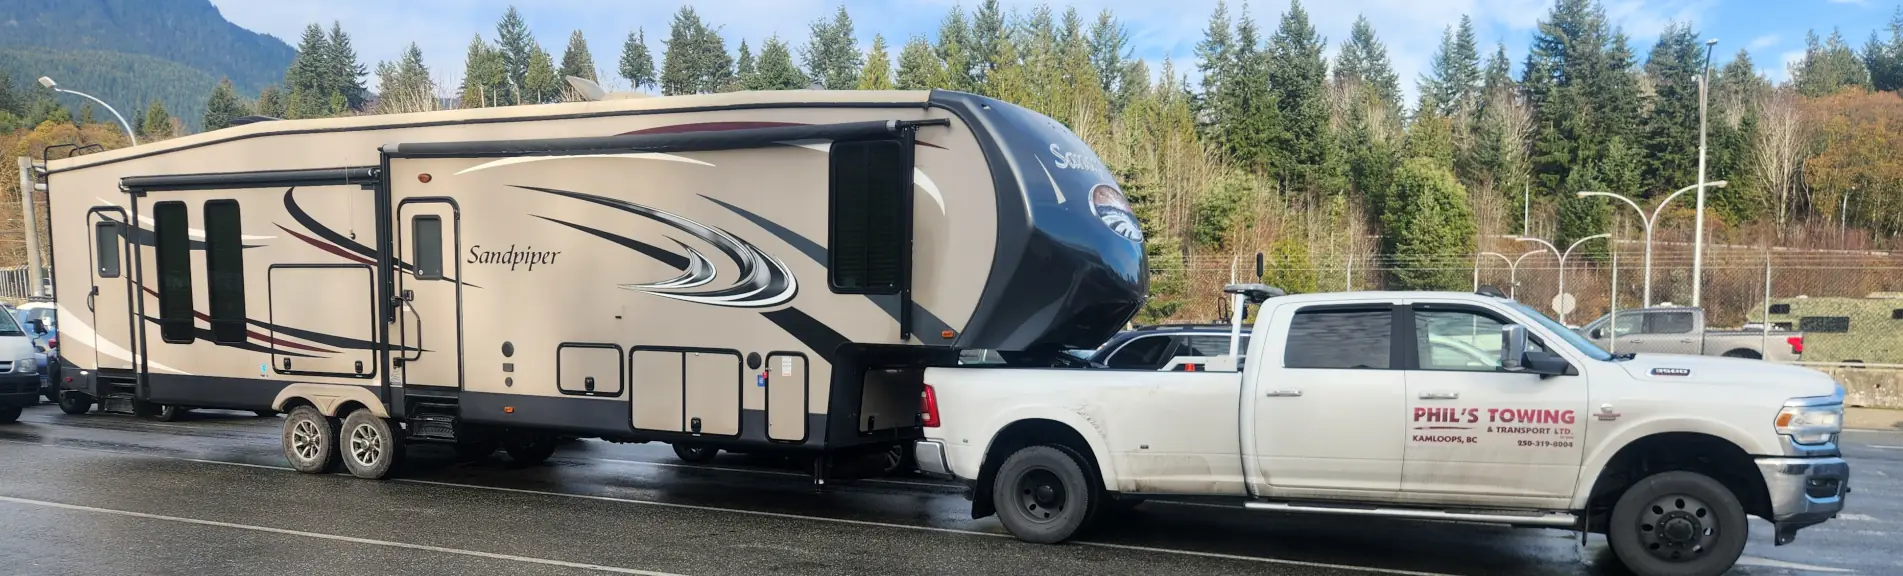 Phil towing an RV trailer